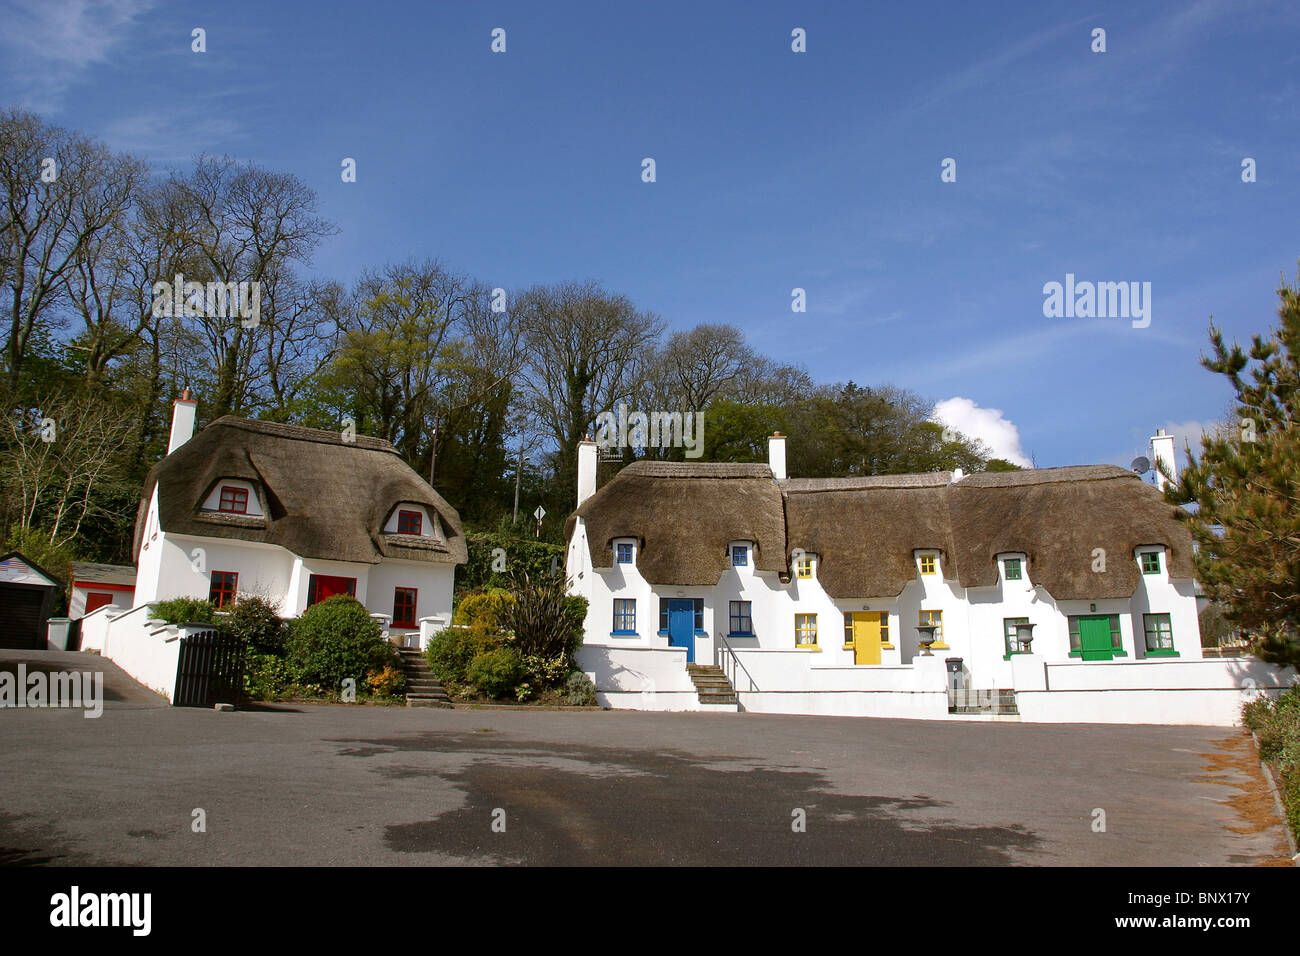 Small Thatched Cottages Rental Stock Photos Small Thatched